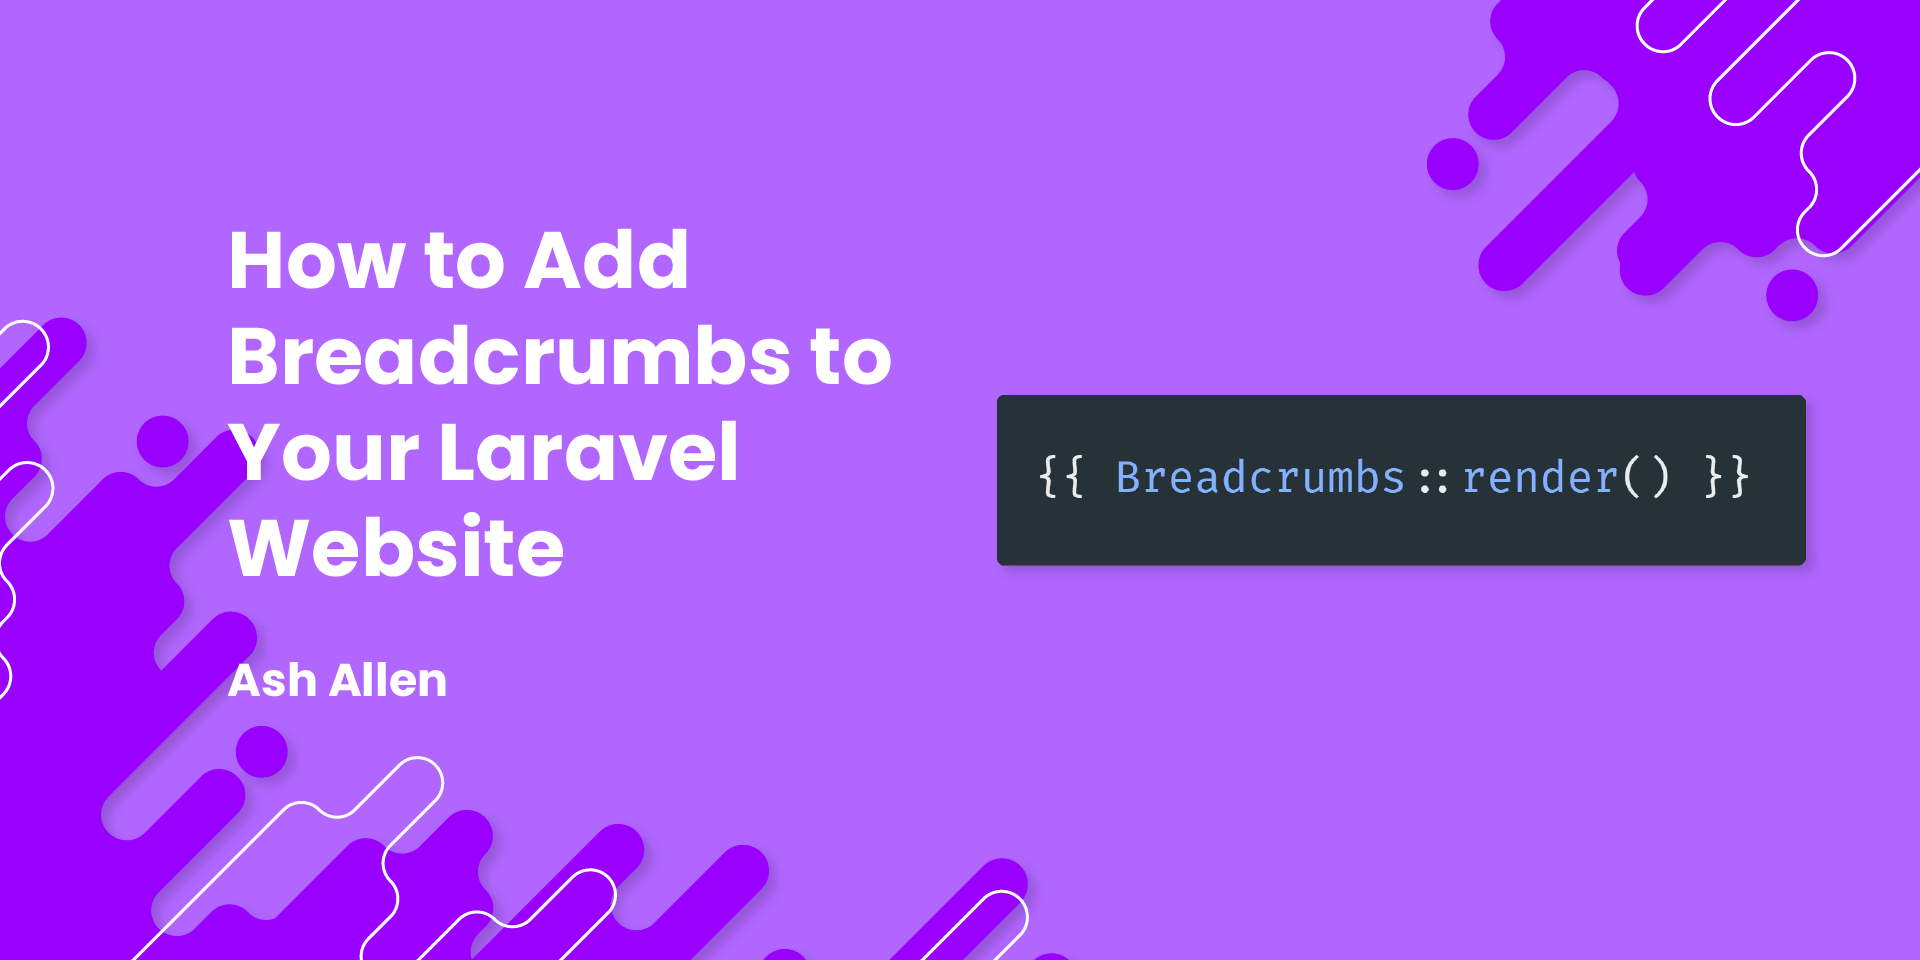 How To Add Breadcrumbs To Your Laravel Website.png